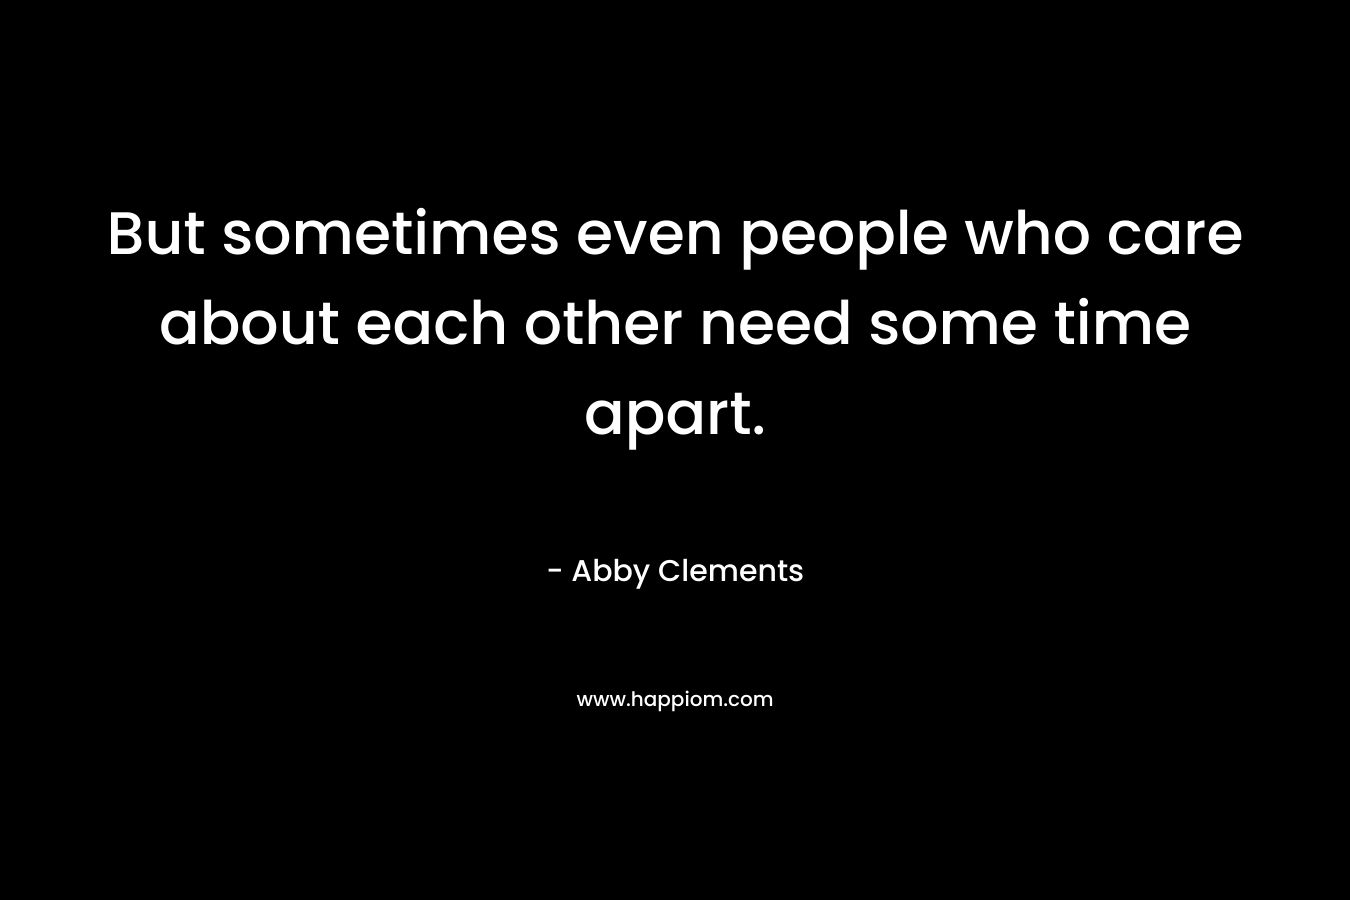 But sometimes even people who care about each other need some time apart. – Abby Clements